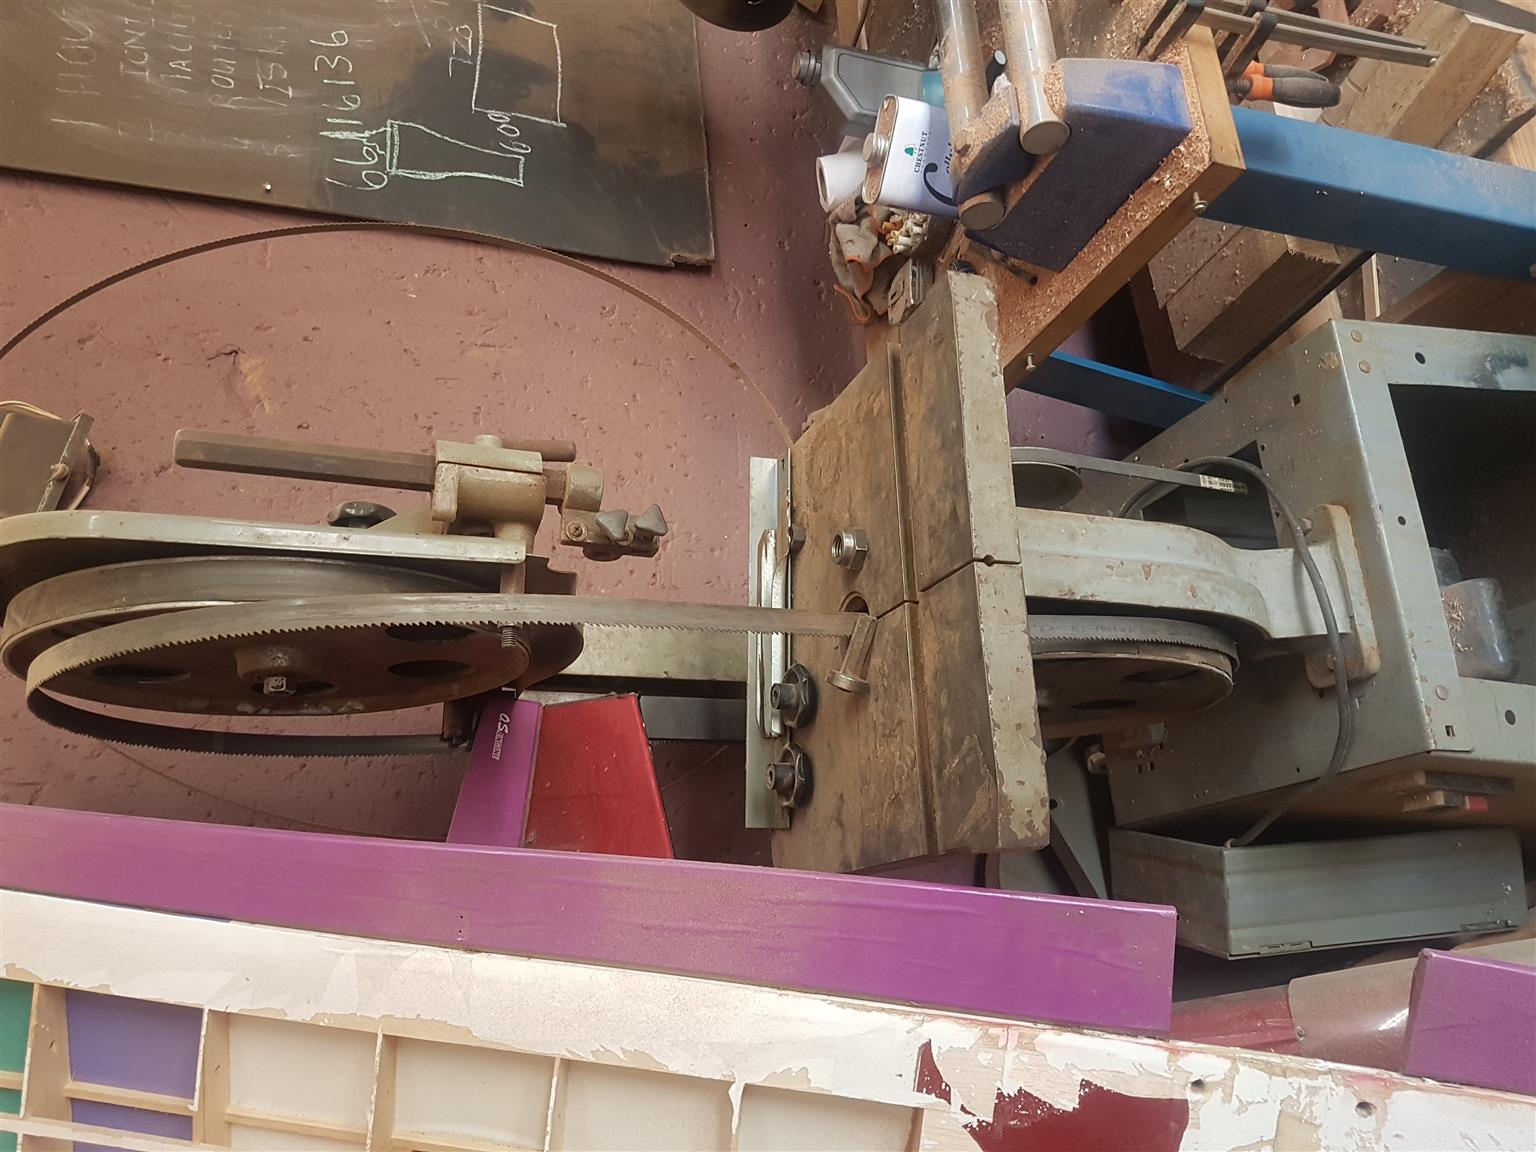 Bandsaw for sale